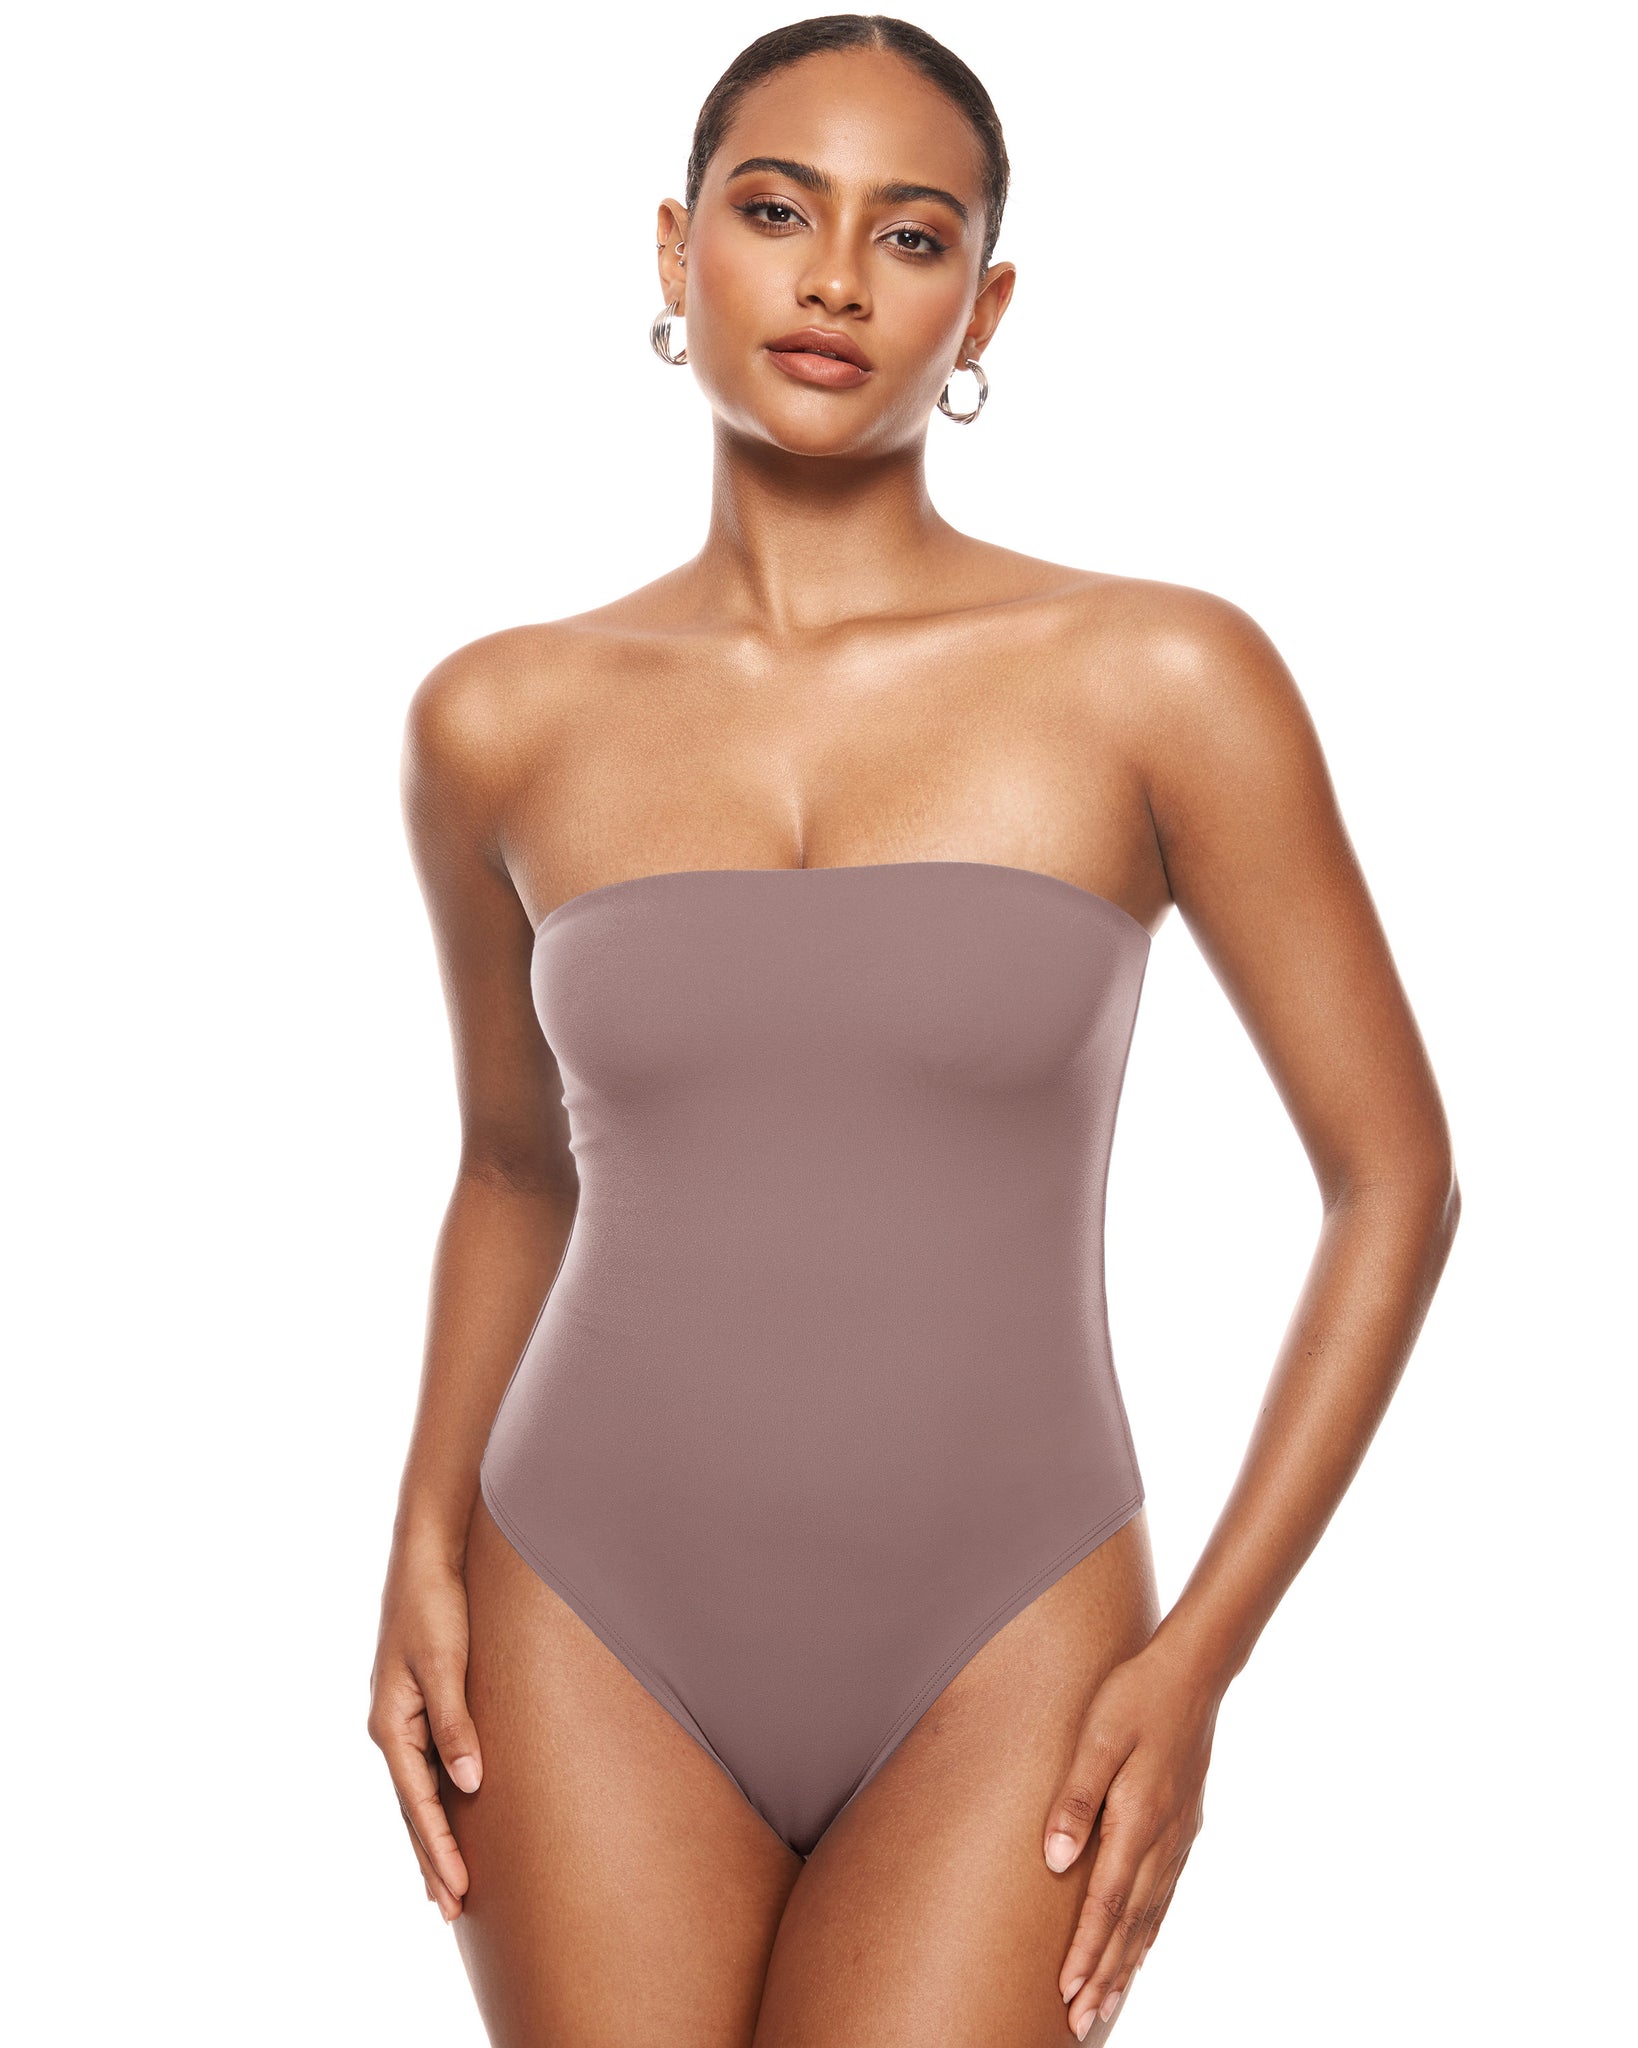 Nude Stretch Satin Strapless Bodysuit from I Saw It First on 21